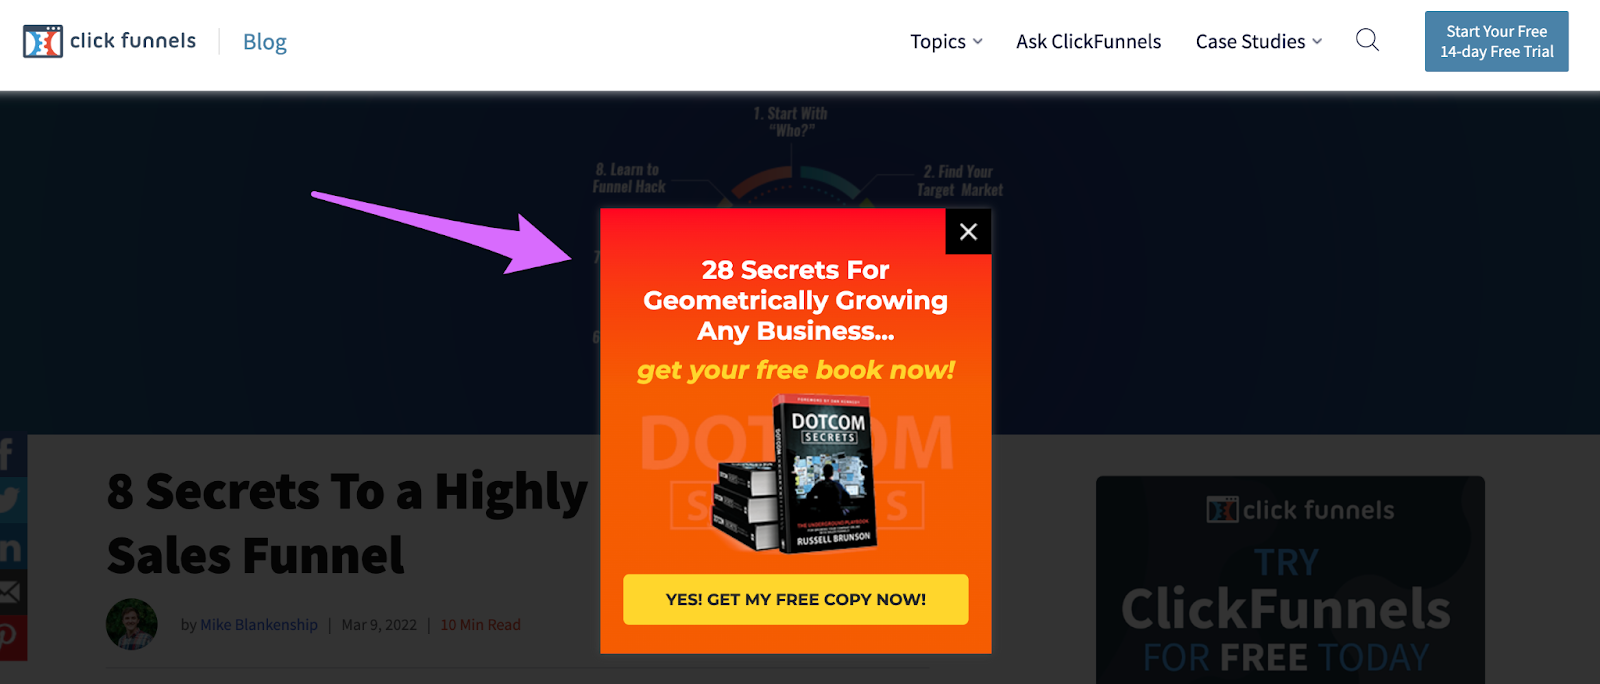 exit intent pop-up bonus with a free ebook offer